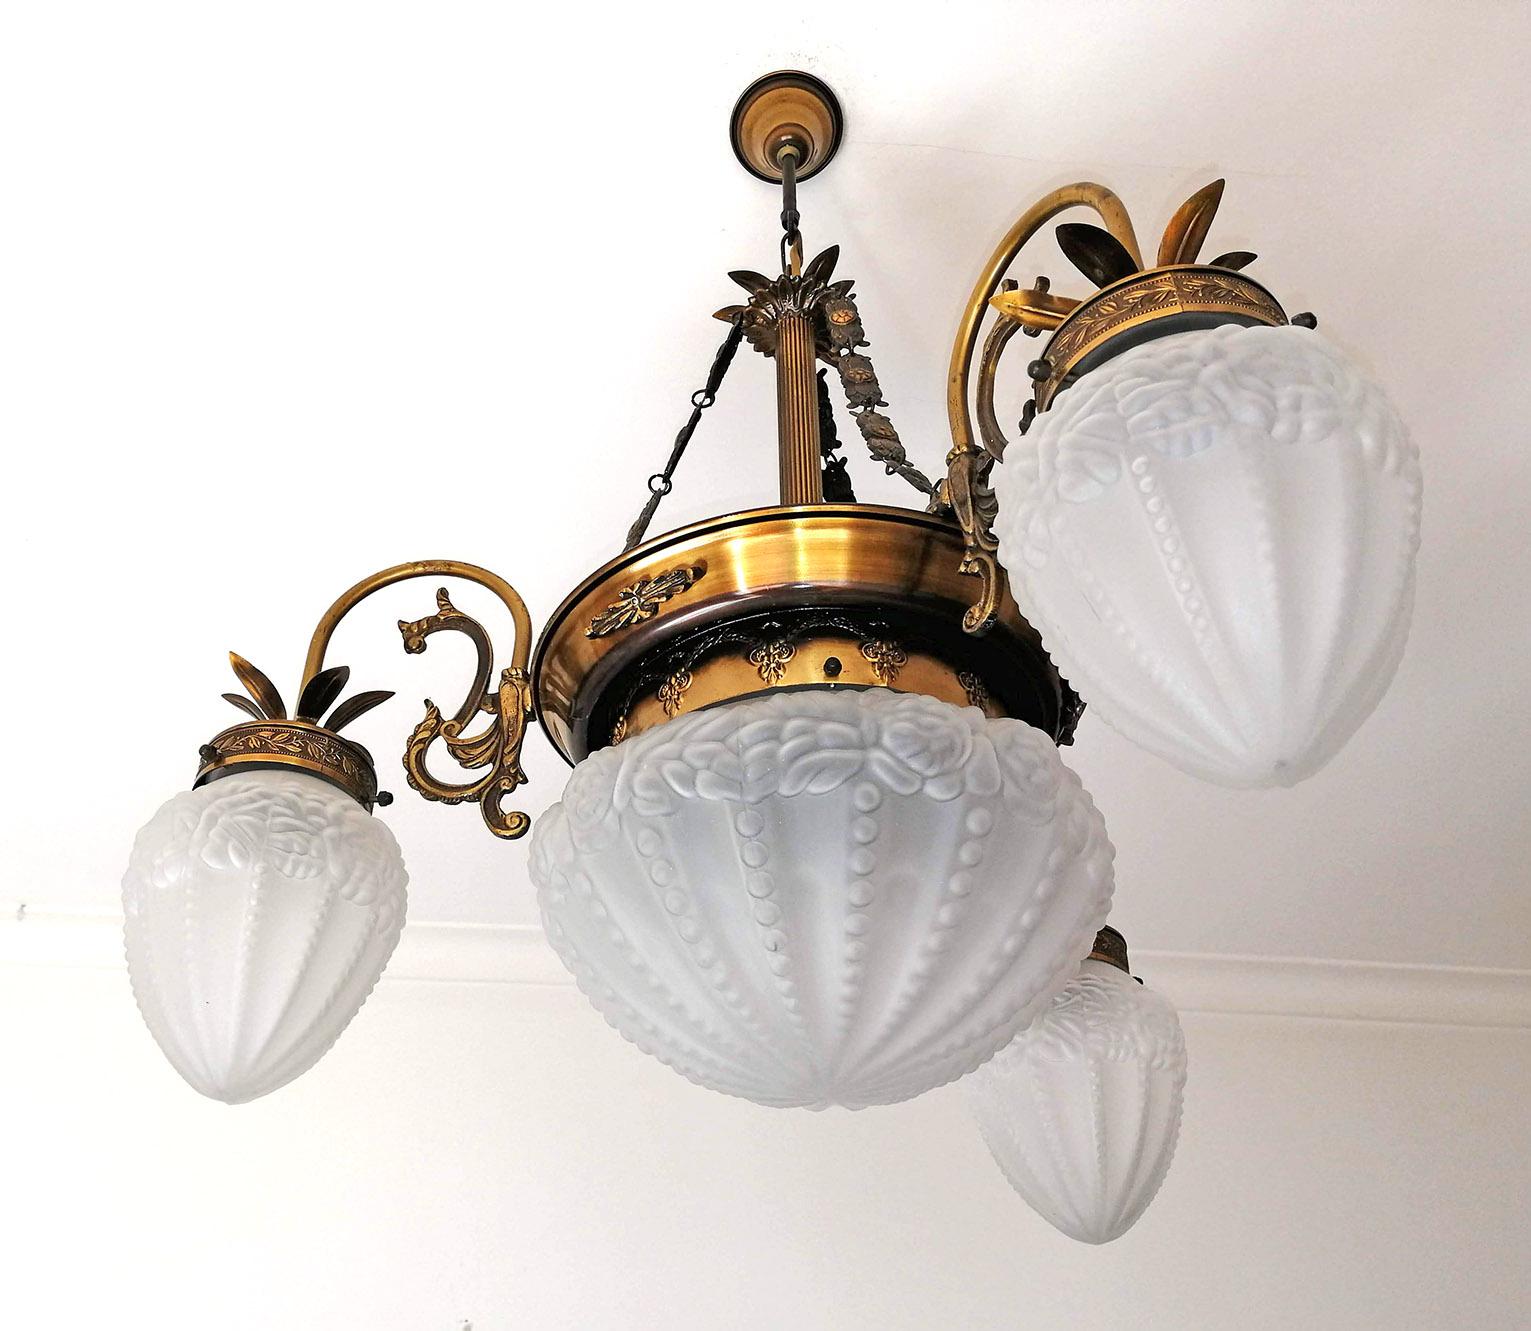 French Degué style Art Deco white frosted glass, 4-light brass chandelier/ gold and bronze color metal with patina.
4 bulbs E14
Good working condition
Measures: Diameter 28.5 in / 72 cm
Height 32 in / 80 cm
Glass shades: 6 in (15 cm) / 8 in (20